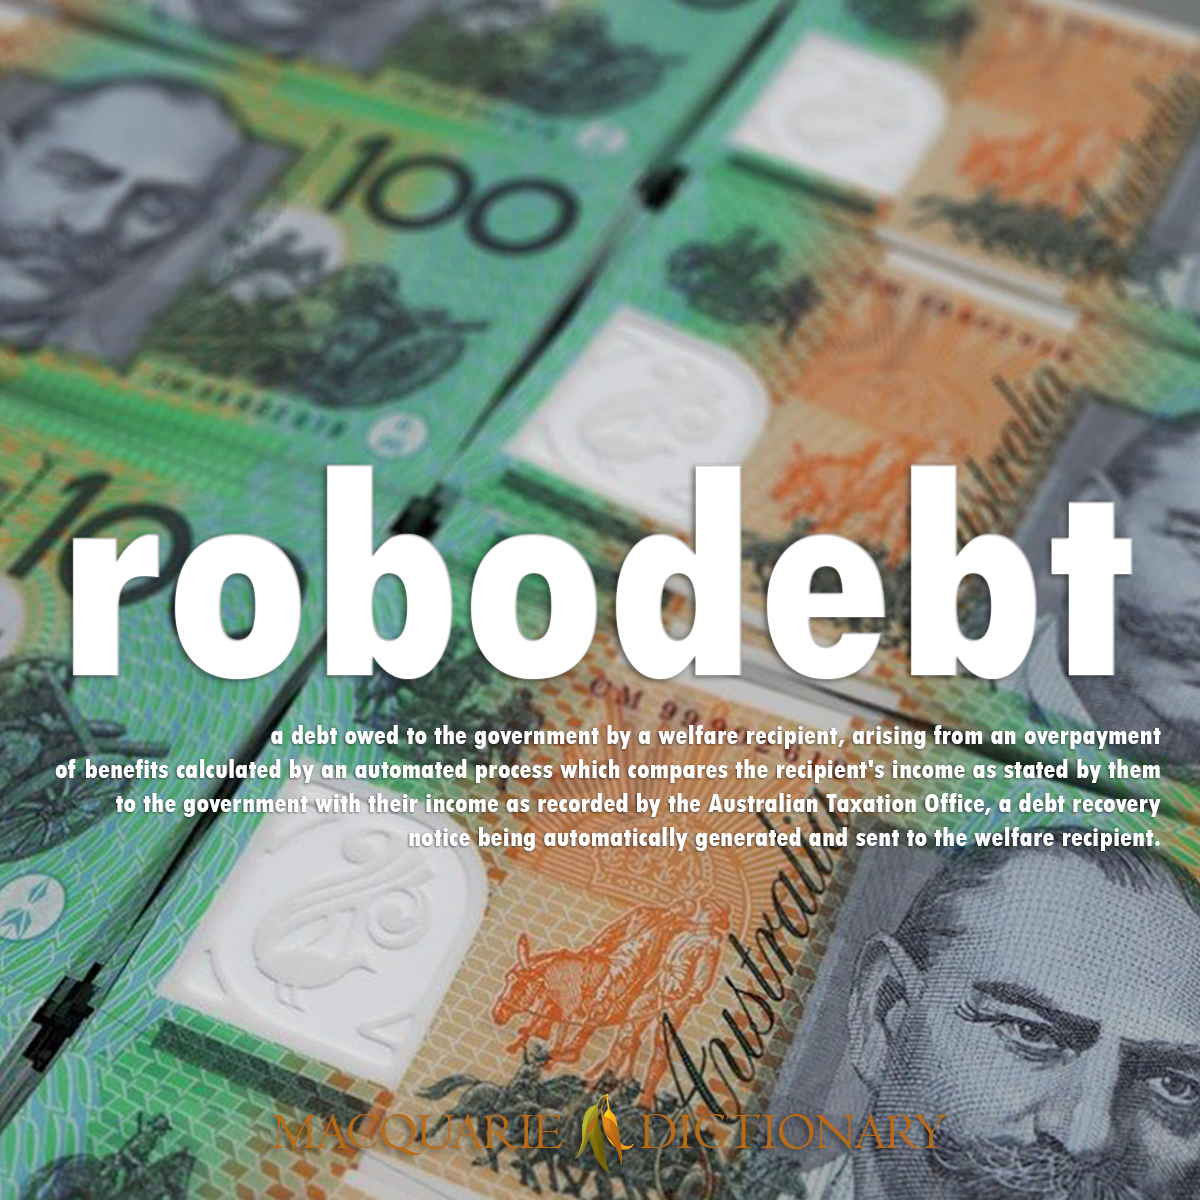 Image of Macquarie Dictionary Word of the Year robodebt a debt owed to the government by a welfare recipient, arising from an overpayment of benefits calculated by an automated process which compares the recipient's income as stated by them to the government with their income as recorded by the Australian Taxation Office, a debt recovery notice being automatically generated and sent to the welfare recipient.